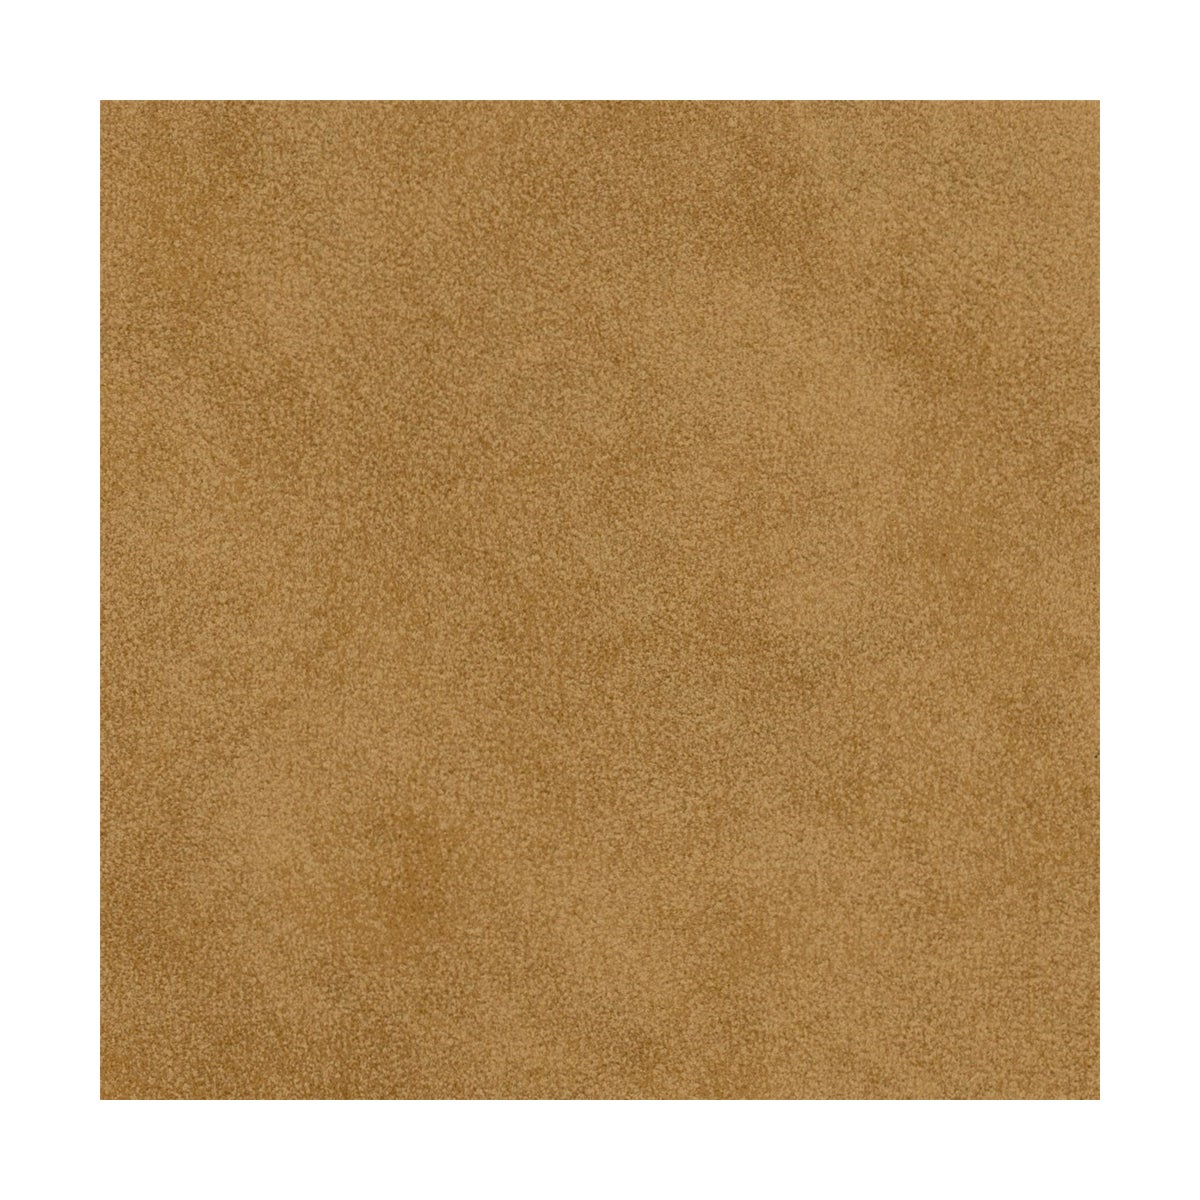 Bainville* - Camel - Fabric By the Yard